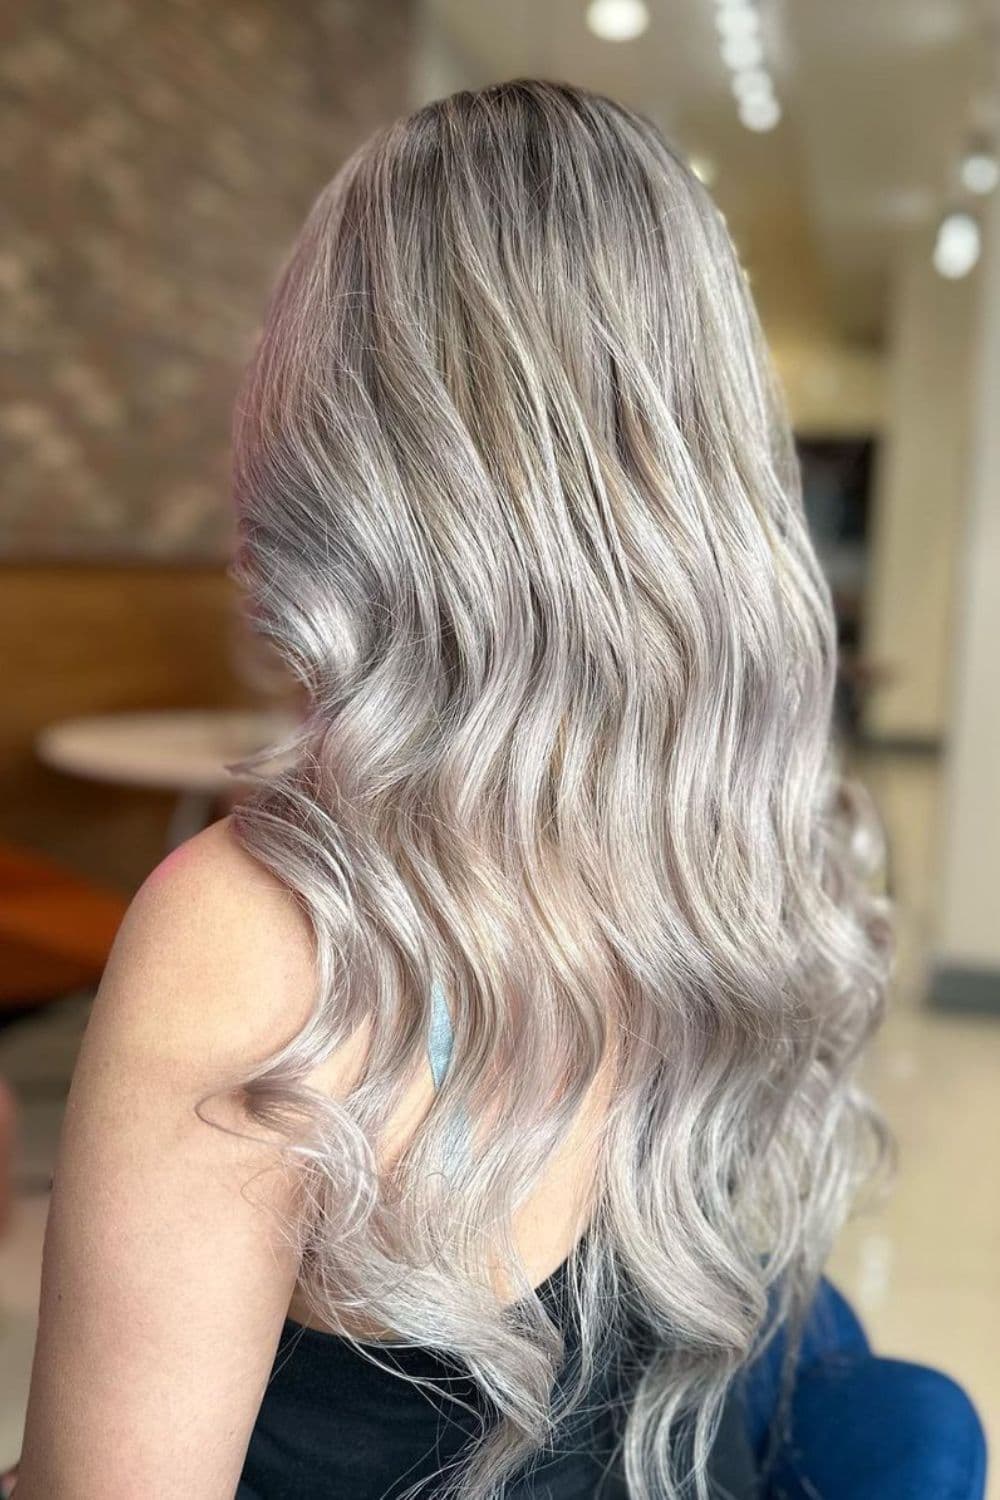 A woman with long silver and gray balayage.